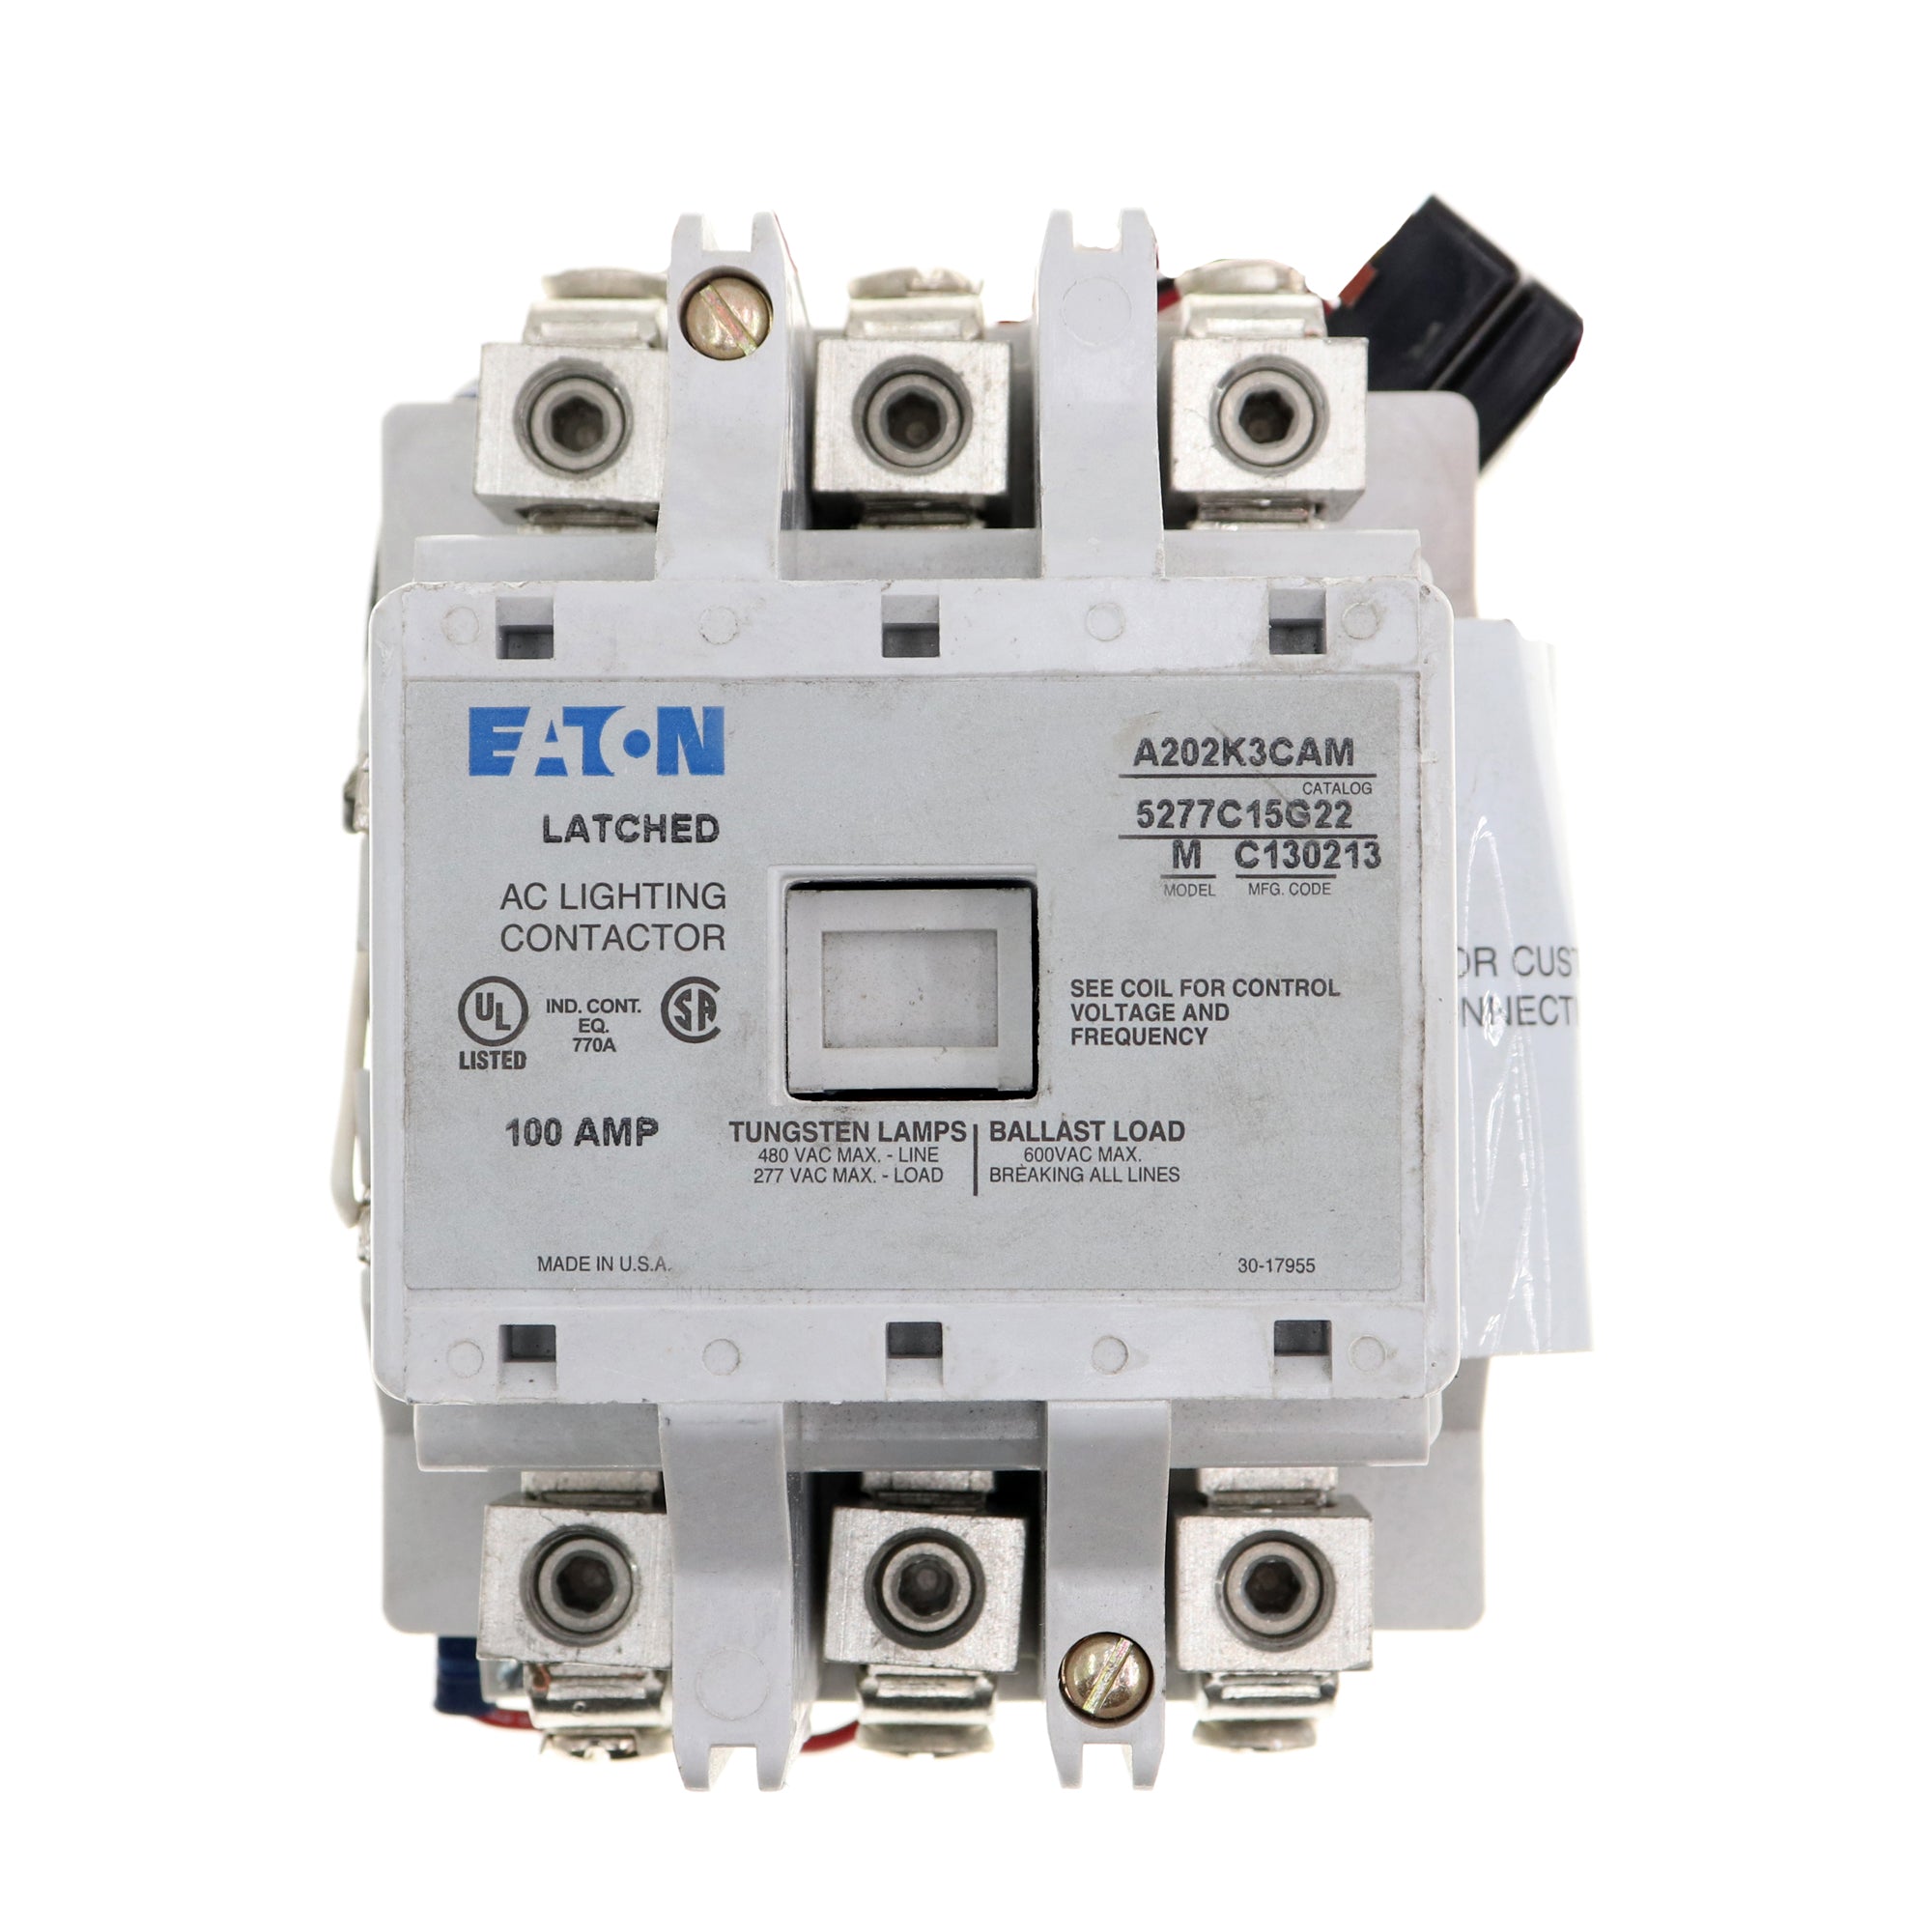 EATON, EATON A202K3CAM MAGNETICALLY LATCHING LIGHTING CONTACTOR, 3P, 100A, 120V COIL